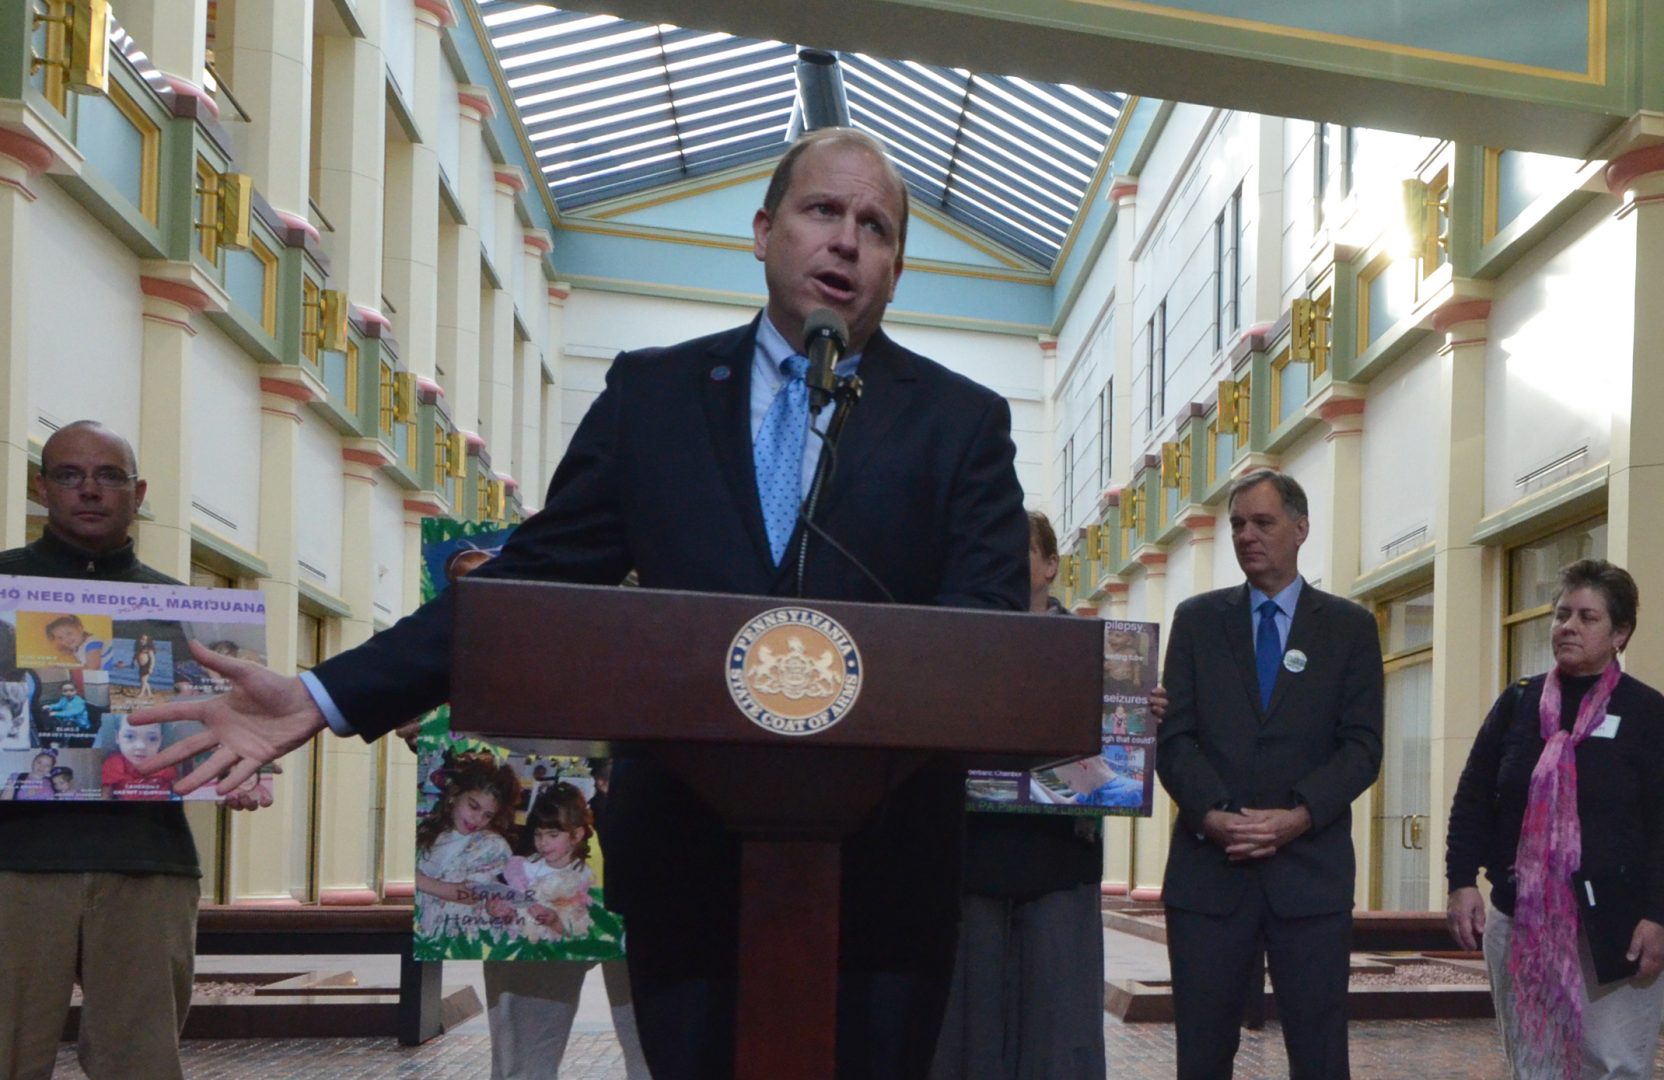 FILE PHOTO: Pennsylvania state Sen. Daylin Leach, D-Montgomery, speaks at a news conference in the Capitol on Tuesday, Jan. 28, 2014 in Harrisburg.